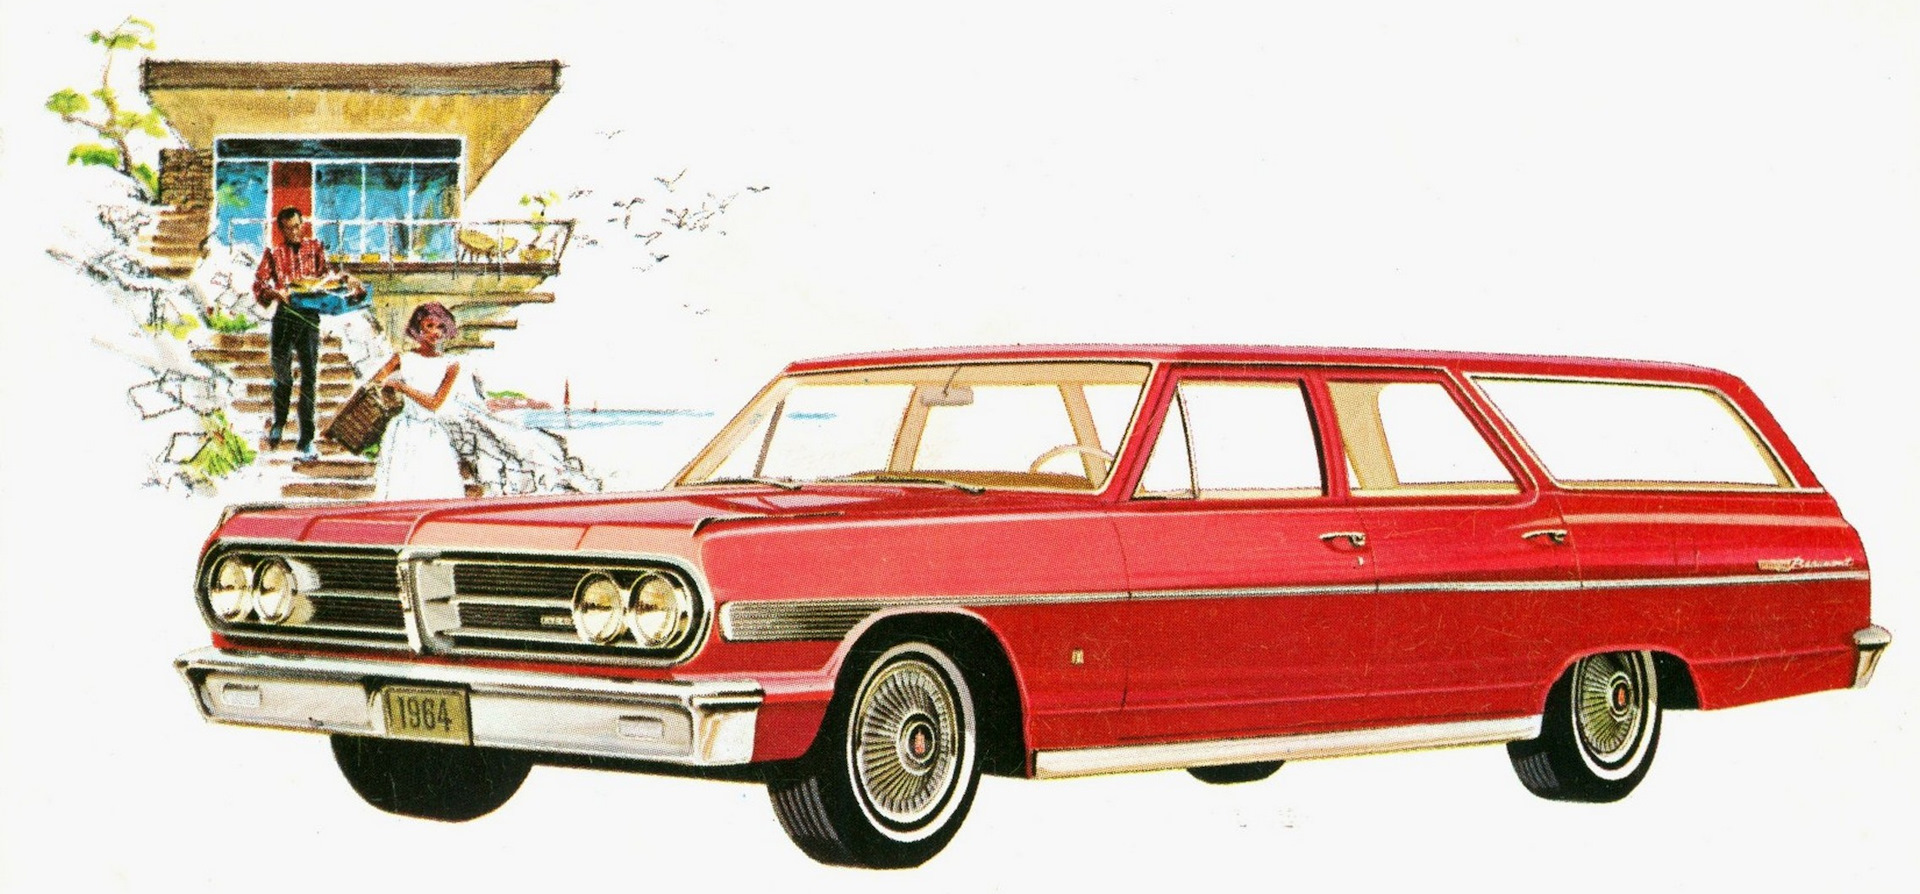 1964. Acadian Beaumont Station Wagon